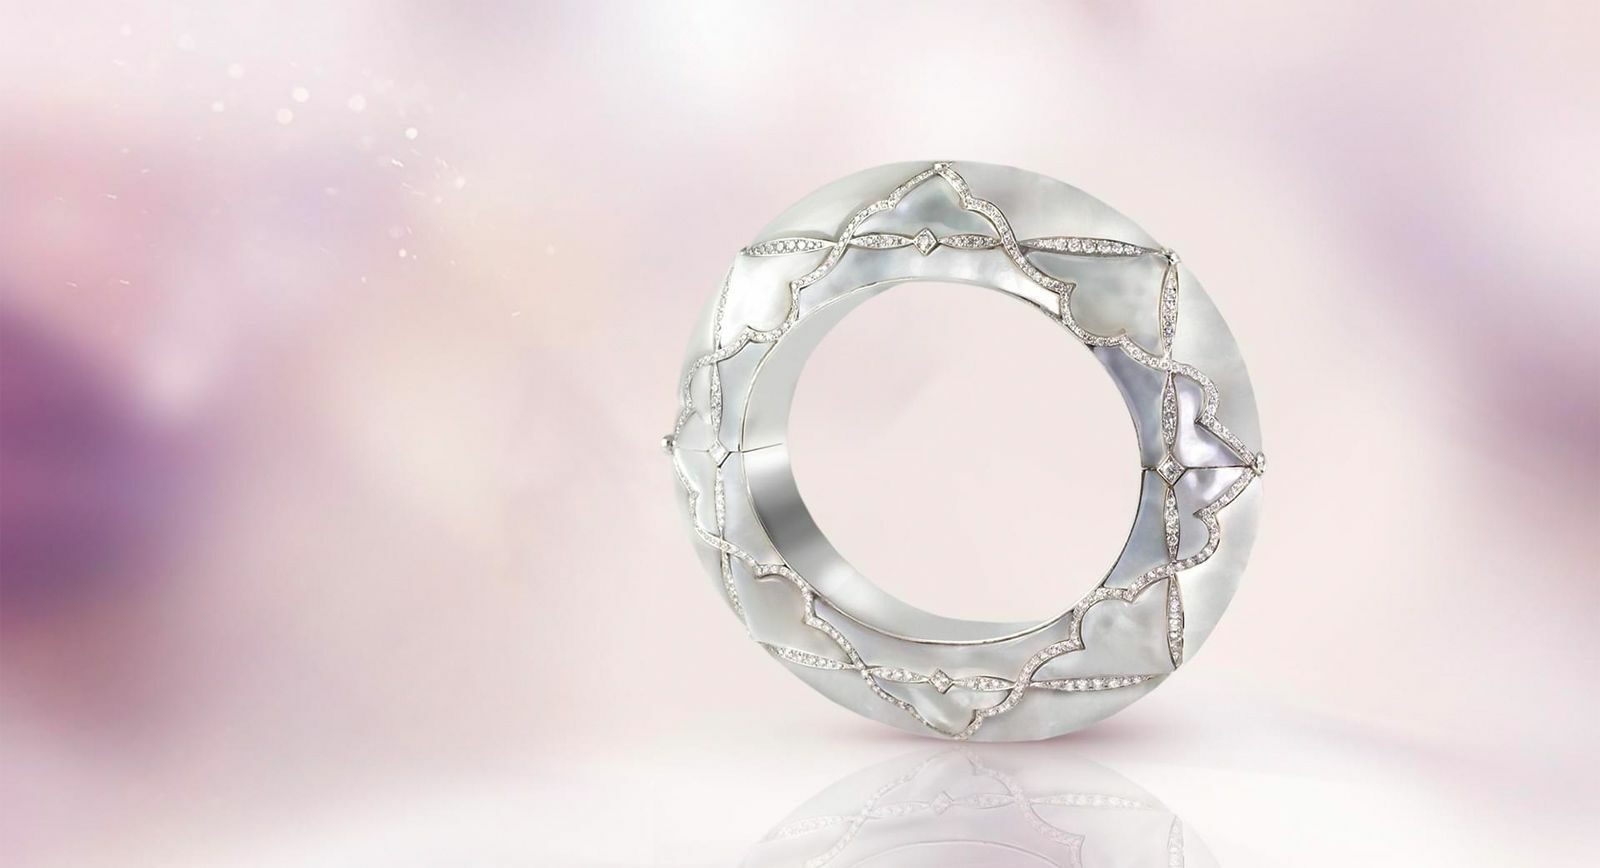 Boghossian cuff bracelet with mother-of-pearl and diamonds